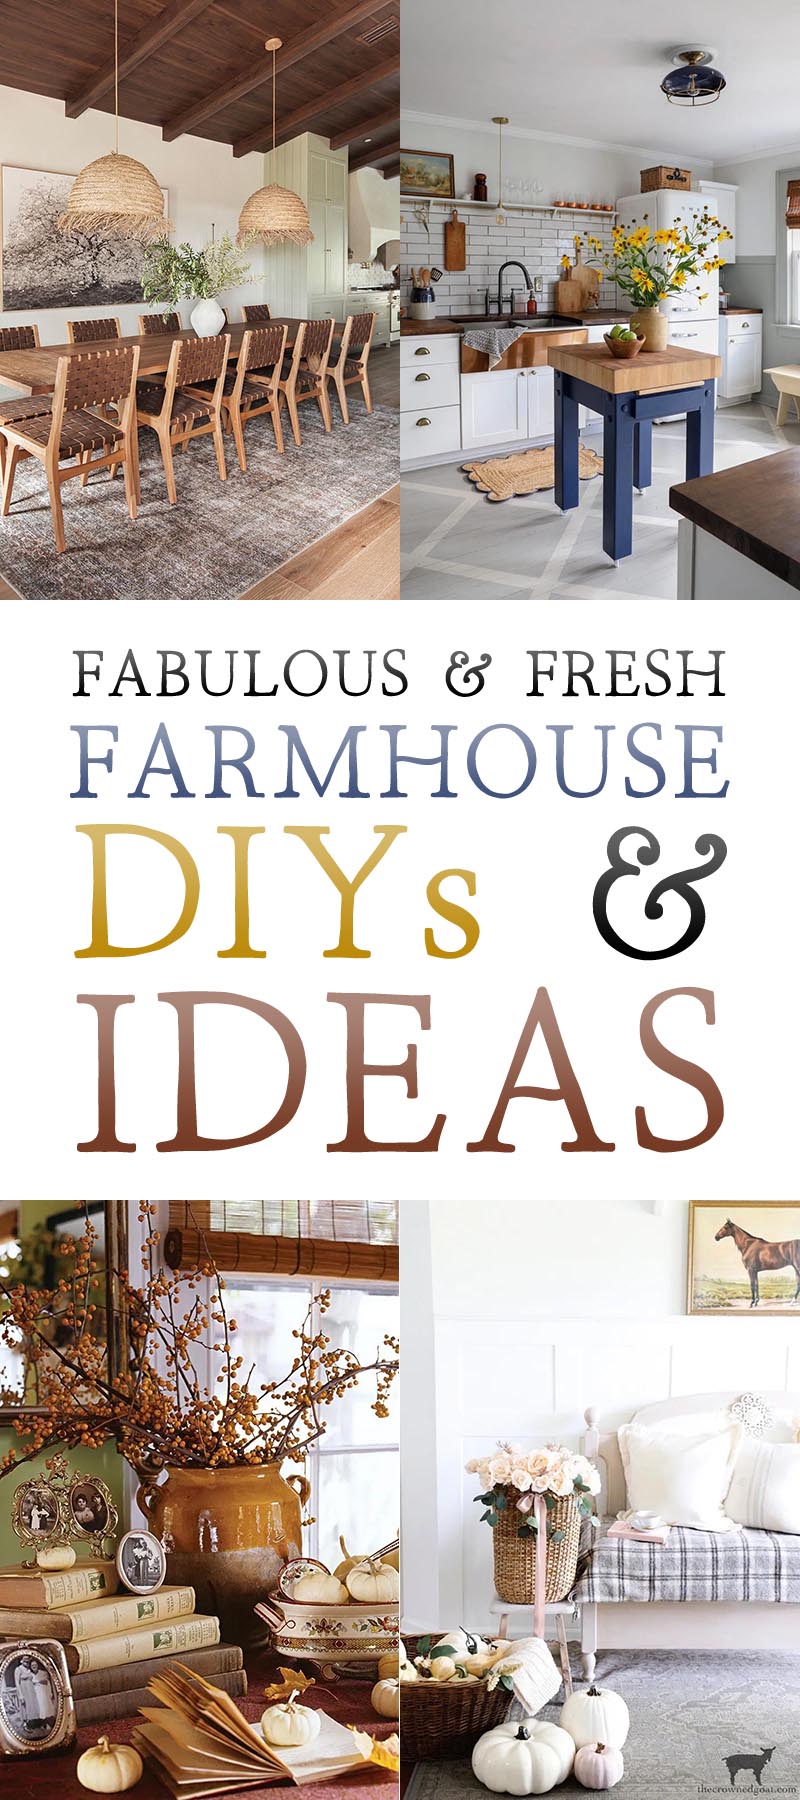 Discover inspiring farmhouse DIYs and decor ideas that blend rustic charm with modern flair. Transform your space with timeless elegance!